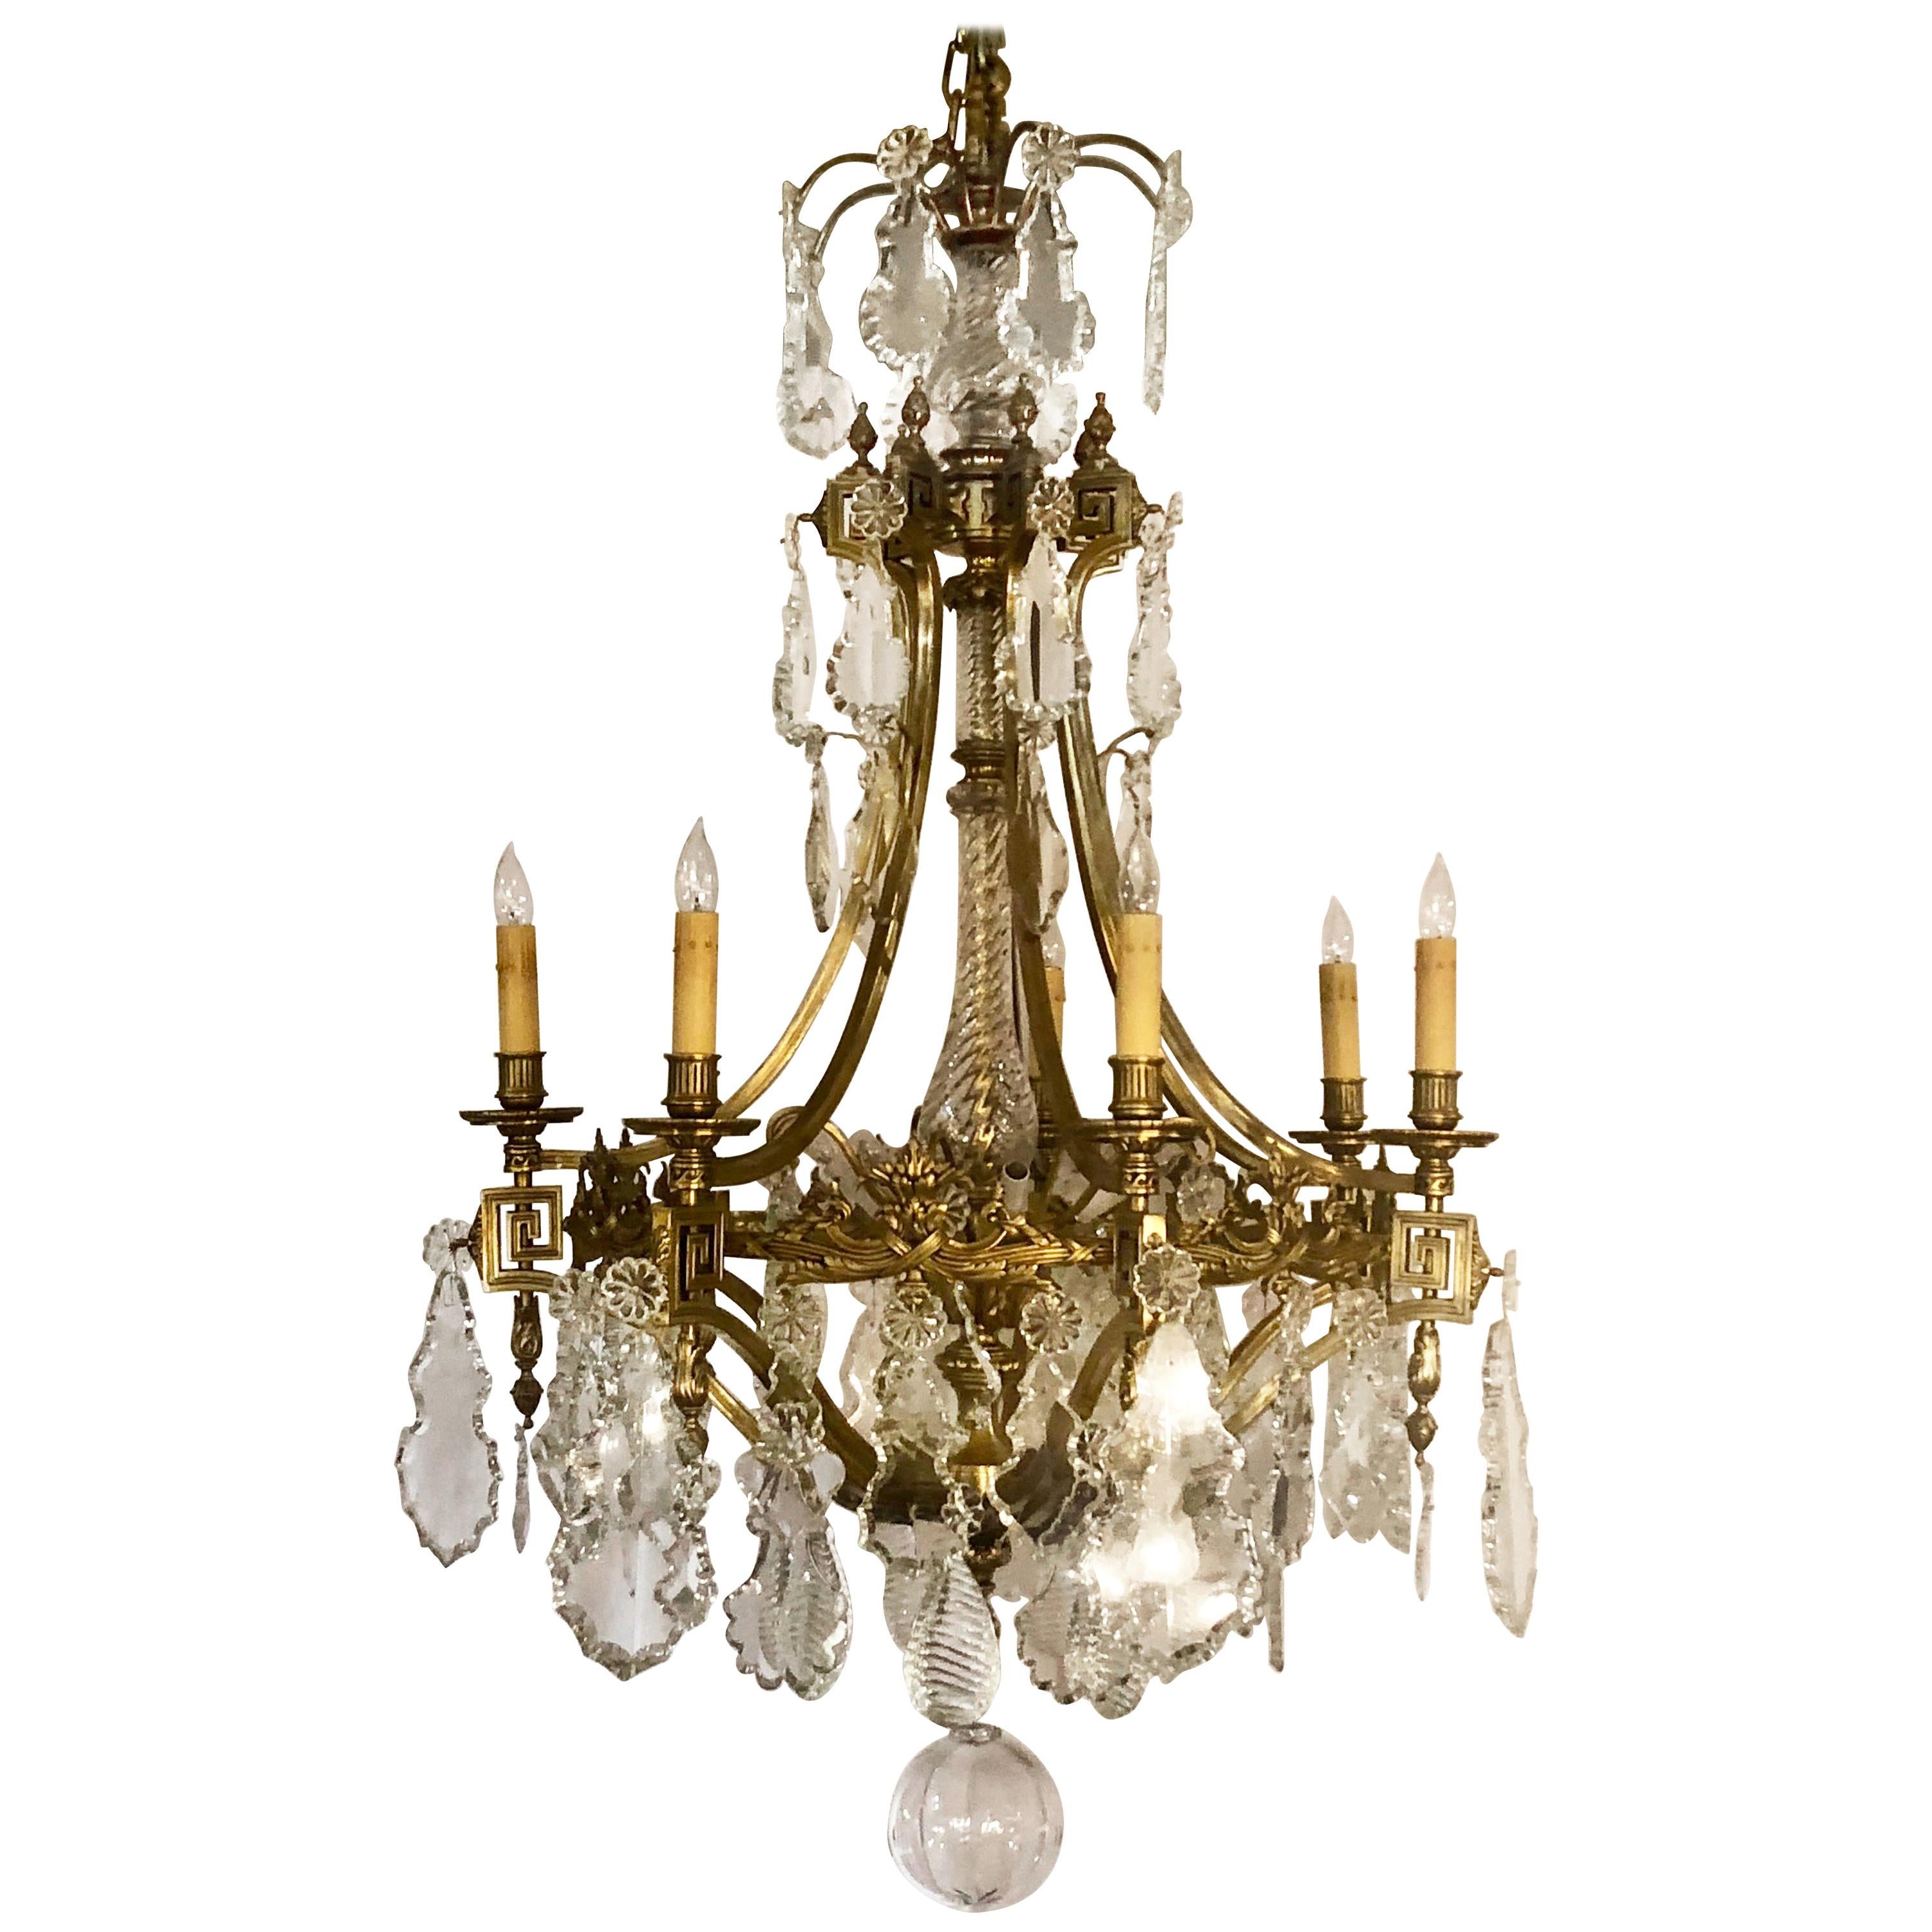 Antique French Gold Bronze and Fine Crystal Chandelier, circa 1890-1900